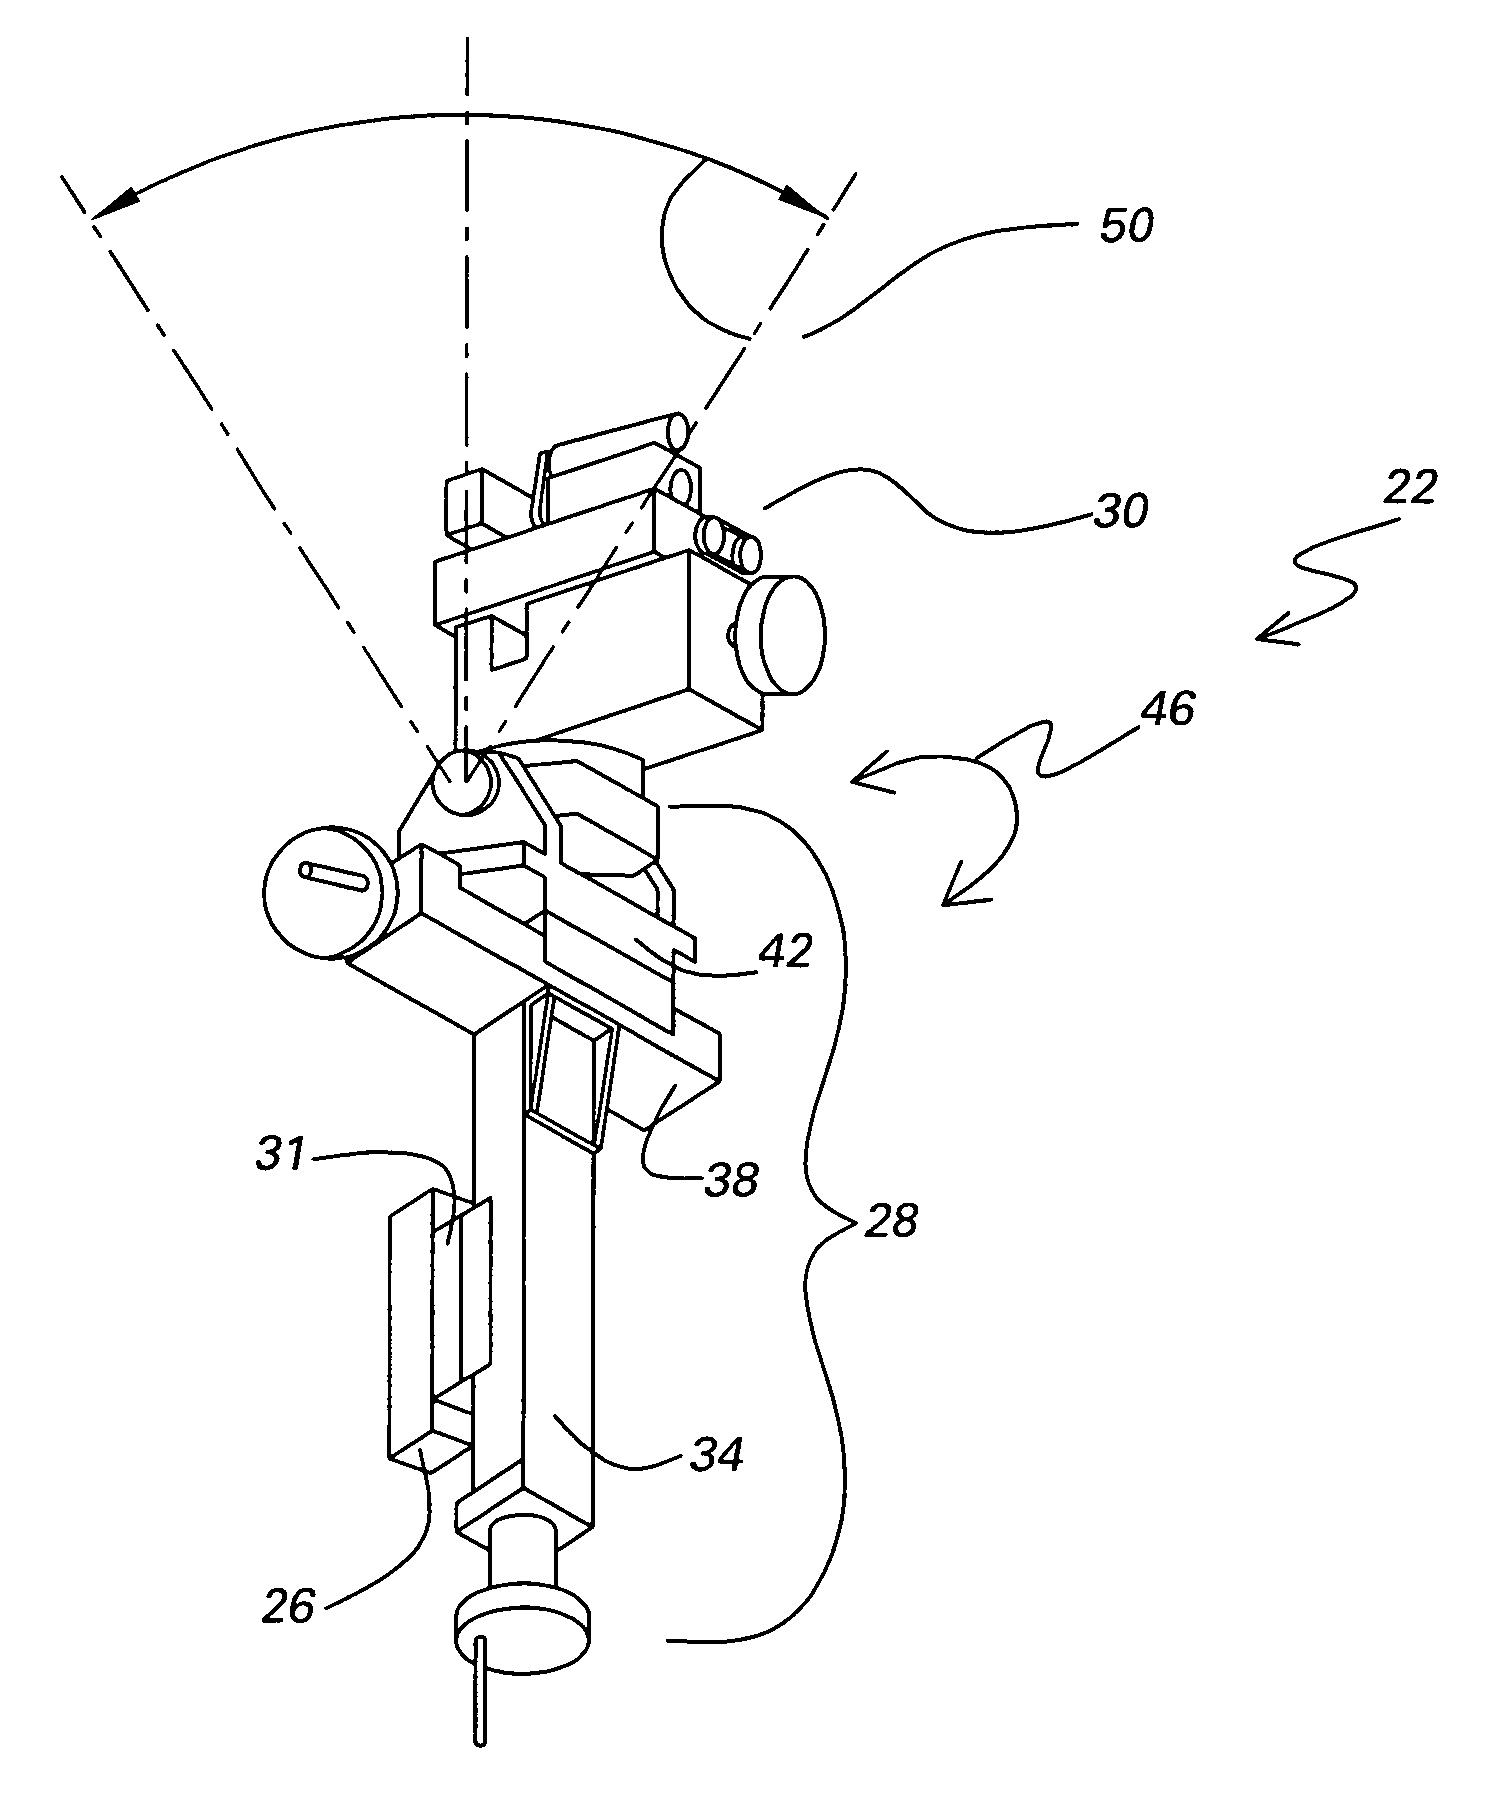 Apparatus and method for machining in confined spaces